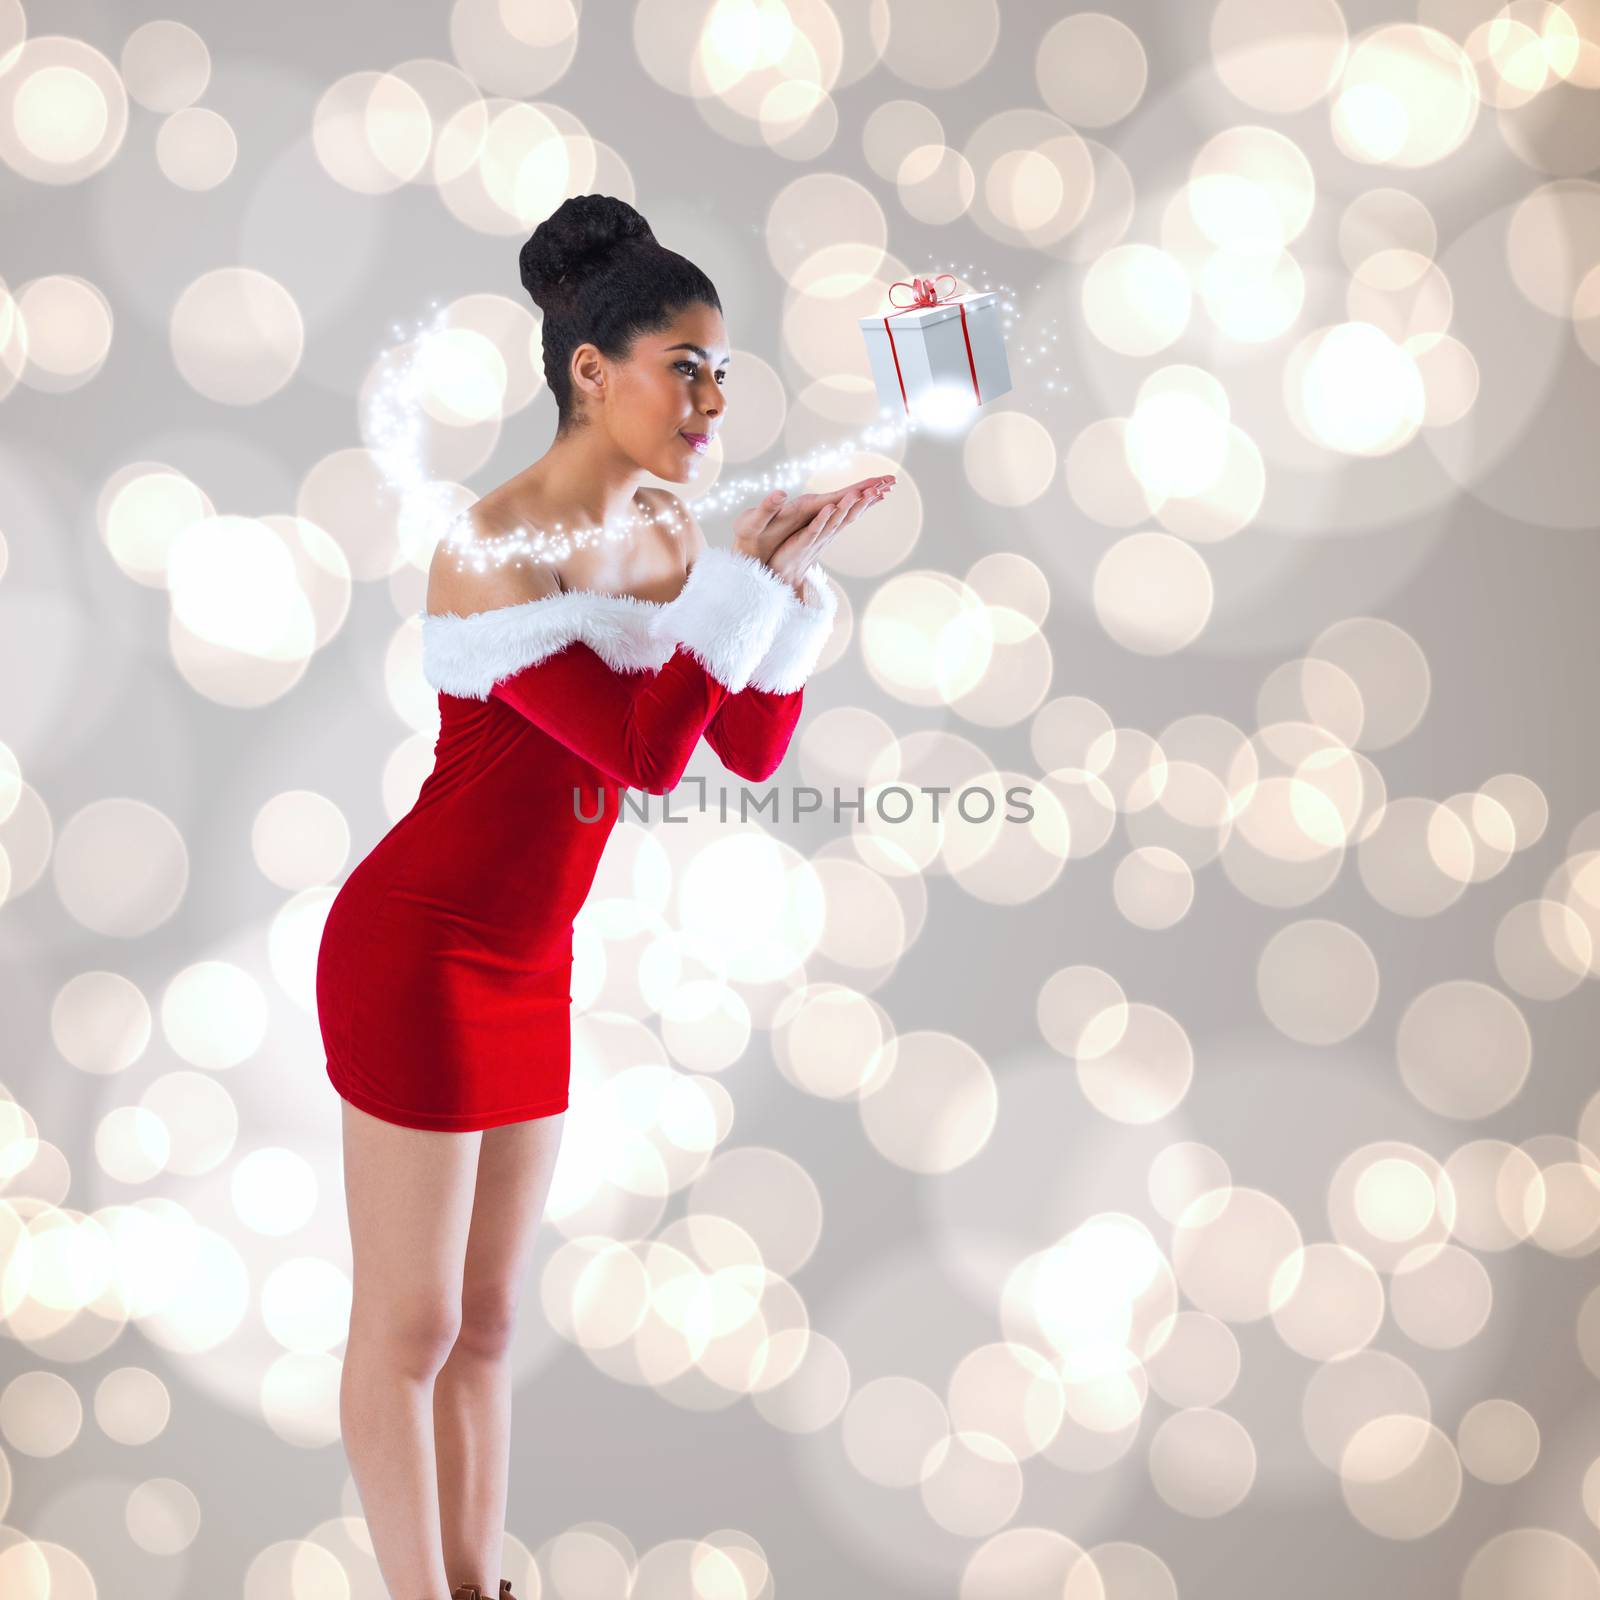 Pretty santa girl blowing over her hands against light glowing dots design pattern